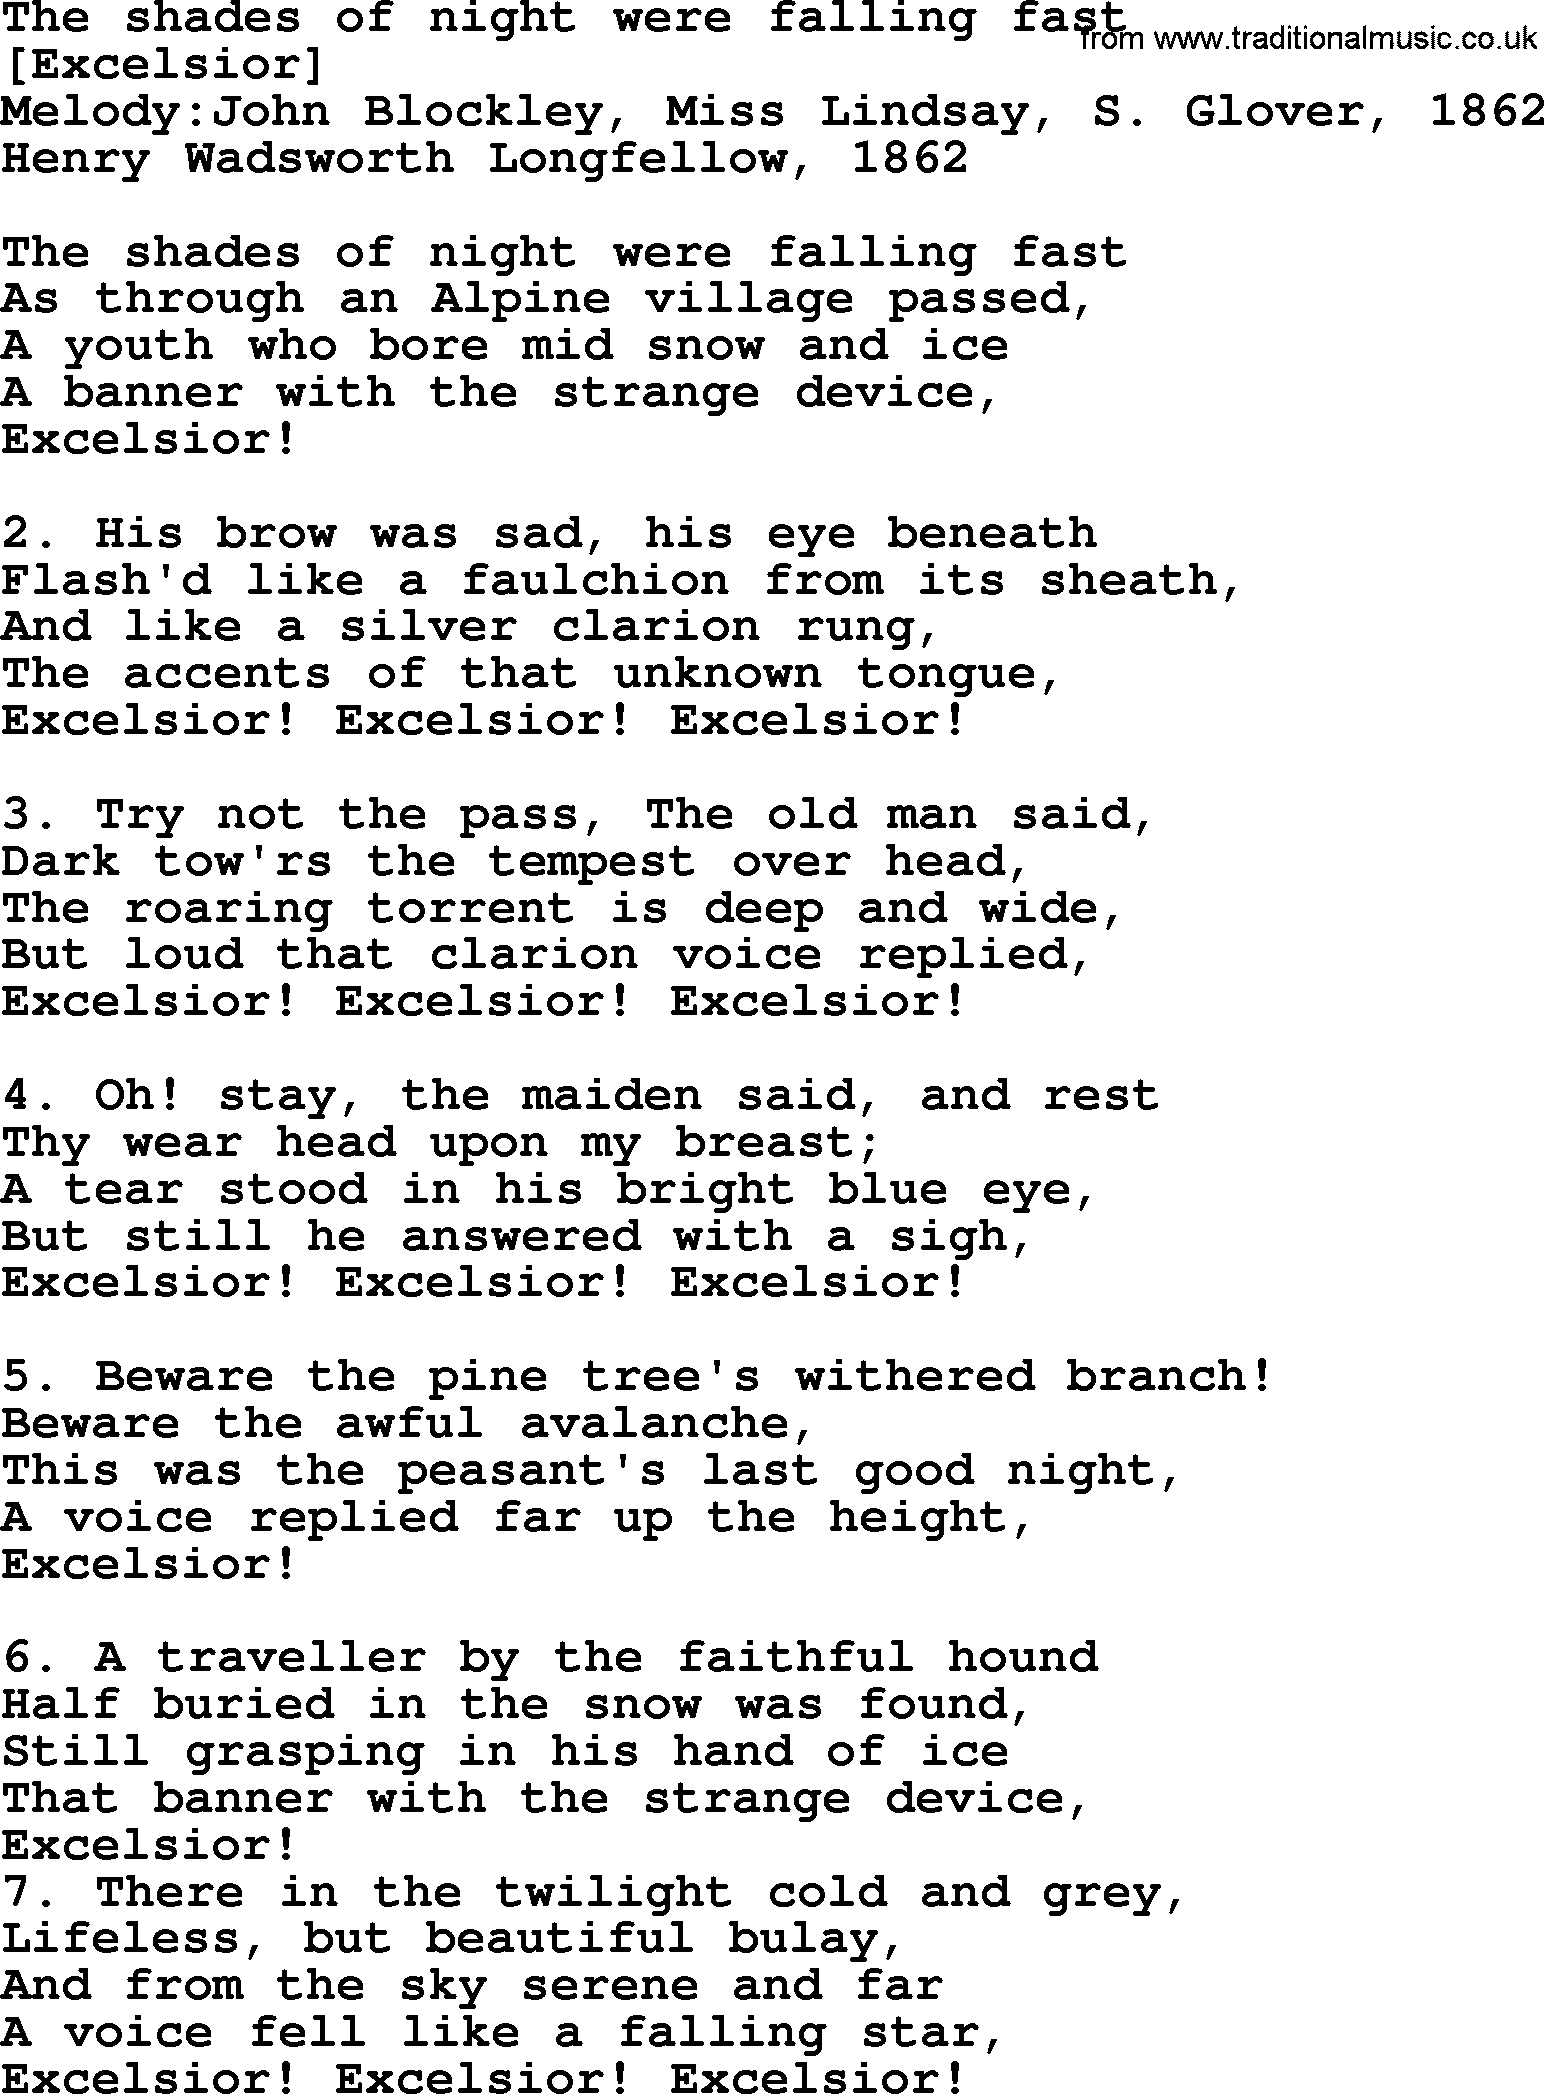 Old English Song: The Shades Of Night Were Falling Fast lyrics